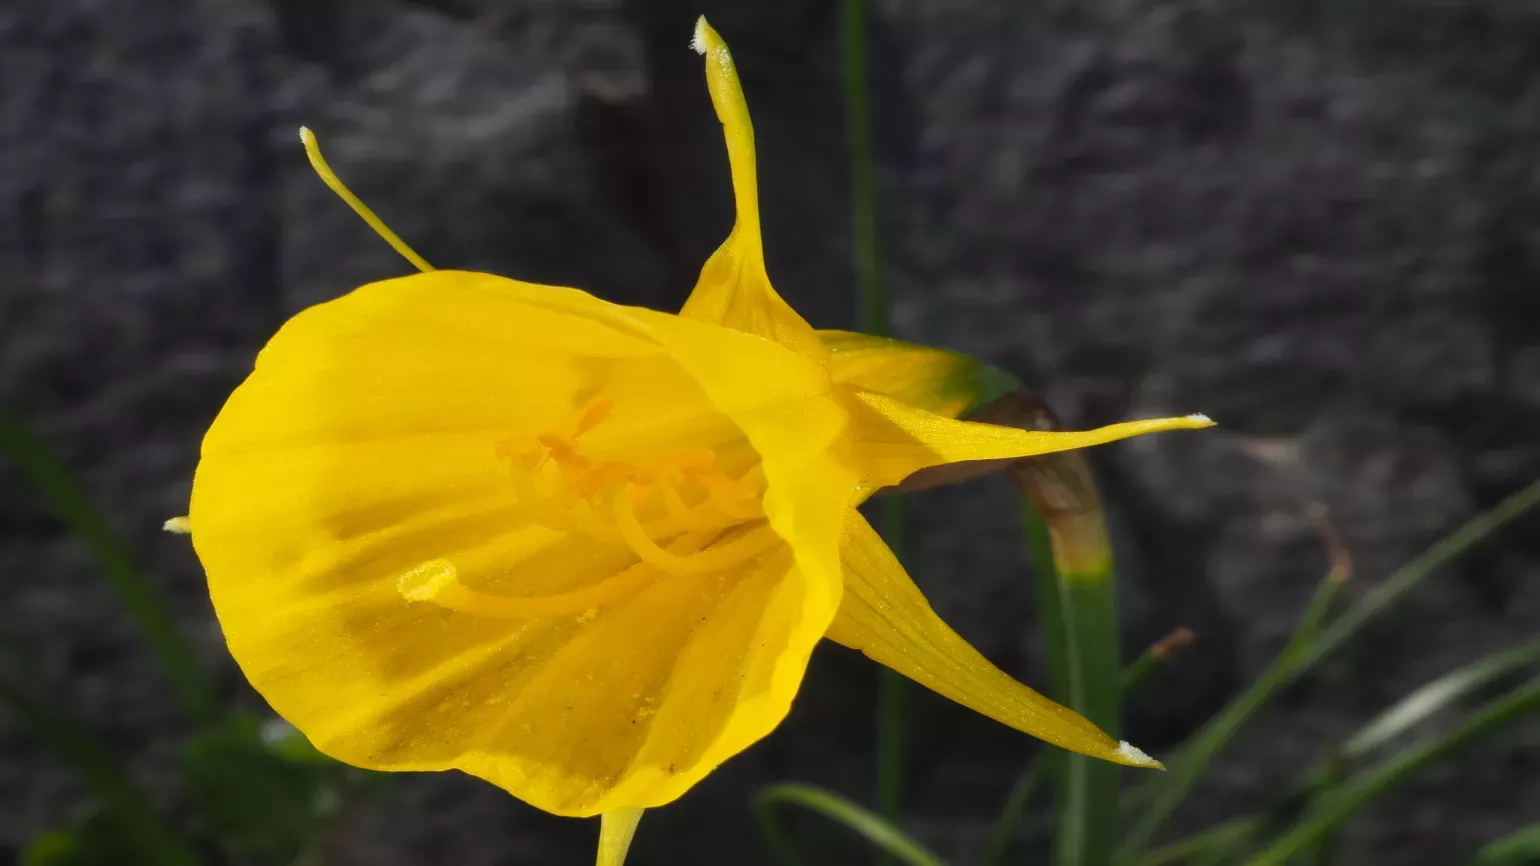 A yellow daffodil with an incredibly wide trumpet and small thin petals